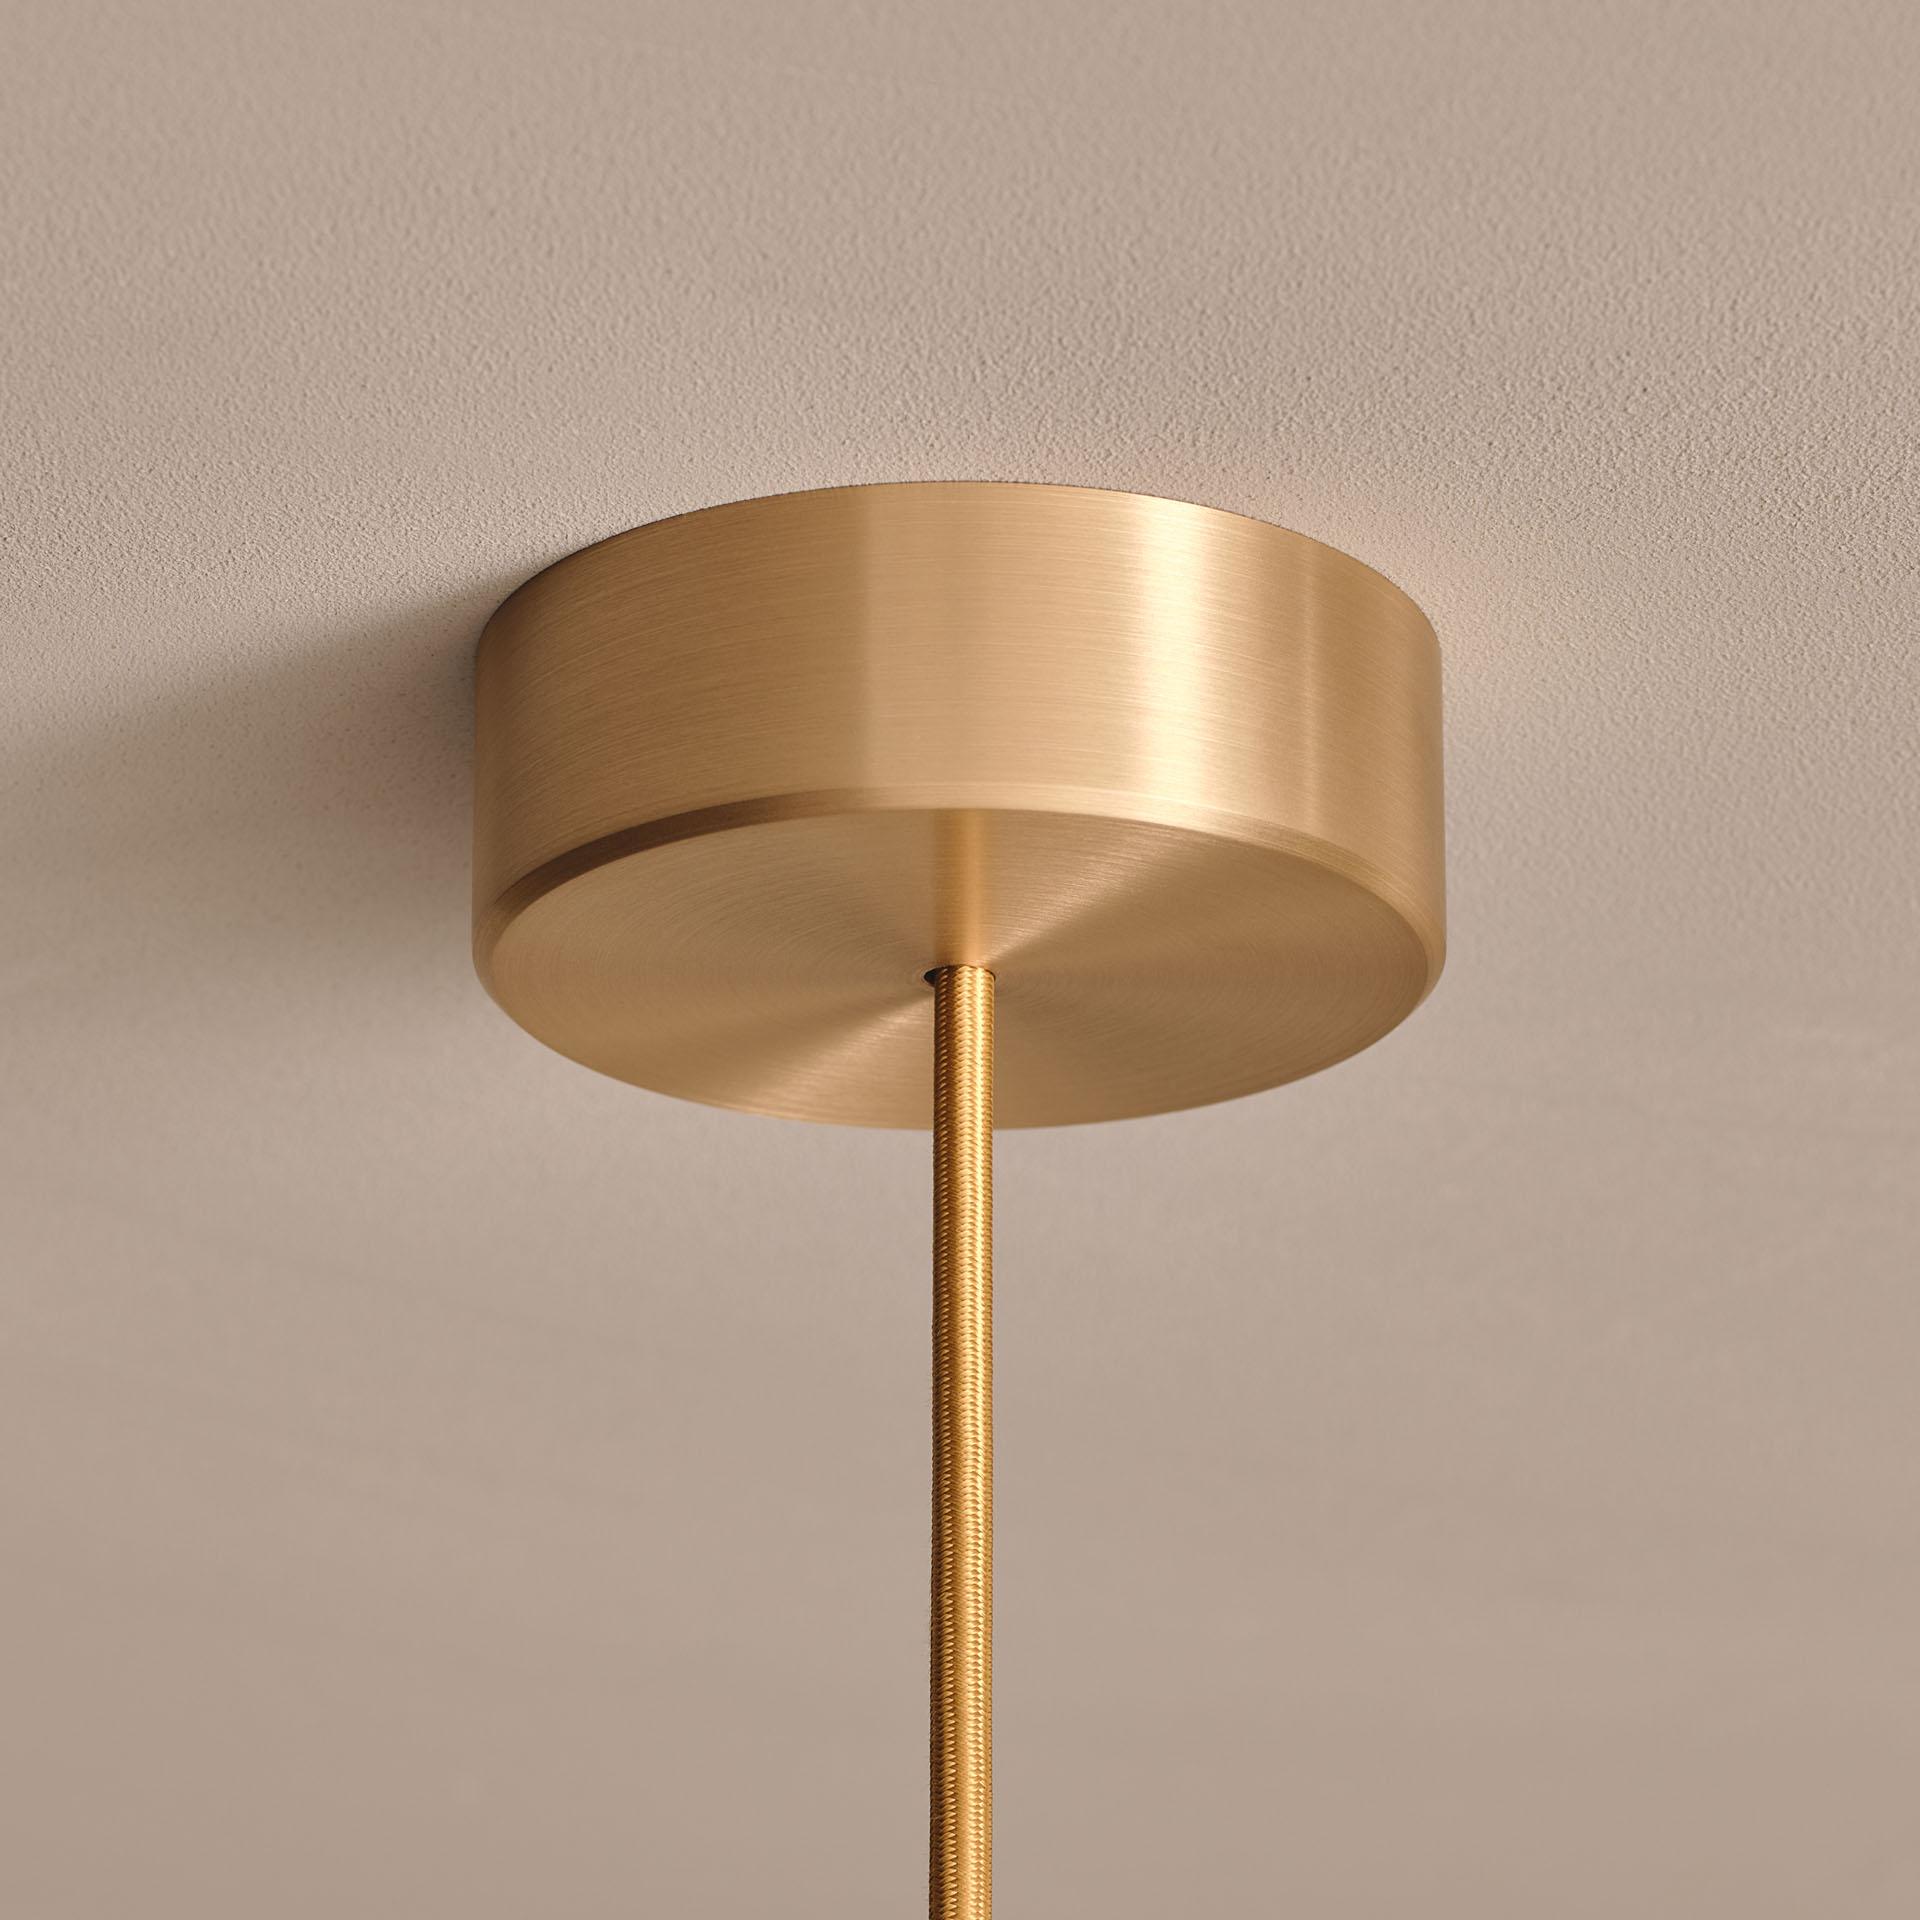 'Cosmic Sol Pendant 100' Handmade Satin Brass Finished Ceiling Lamp In New Condition For Sale In London, GB